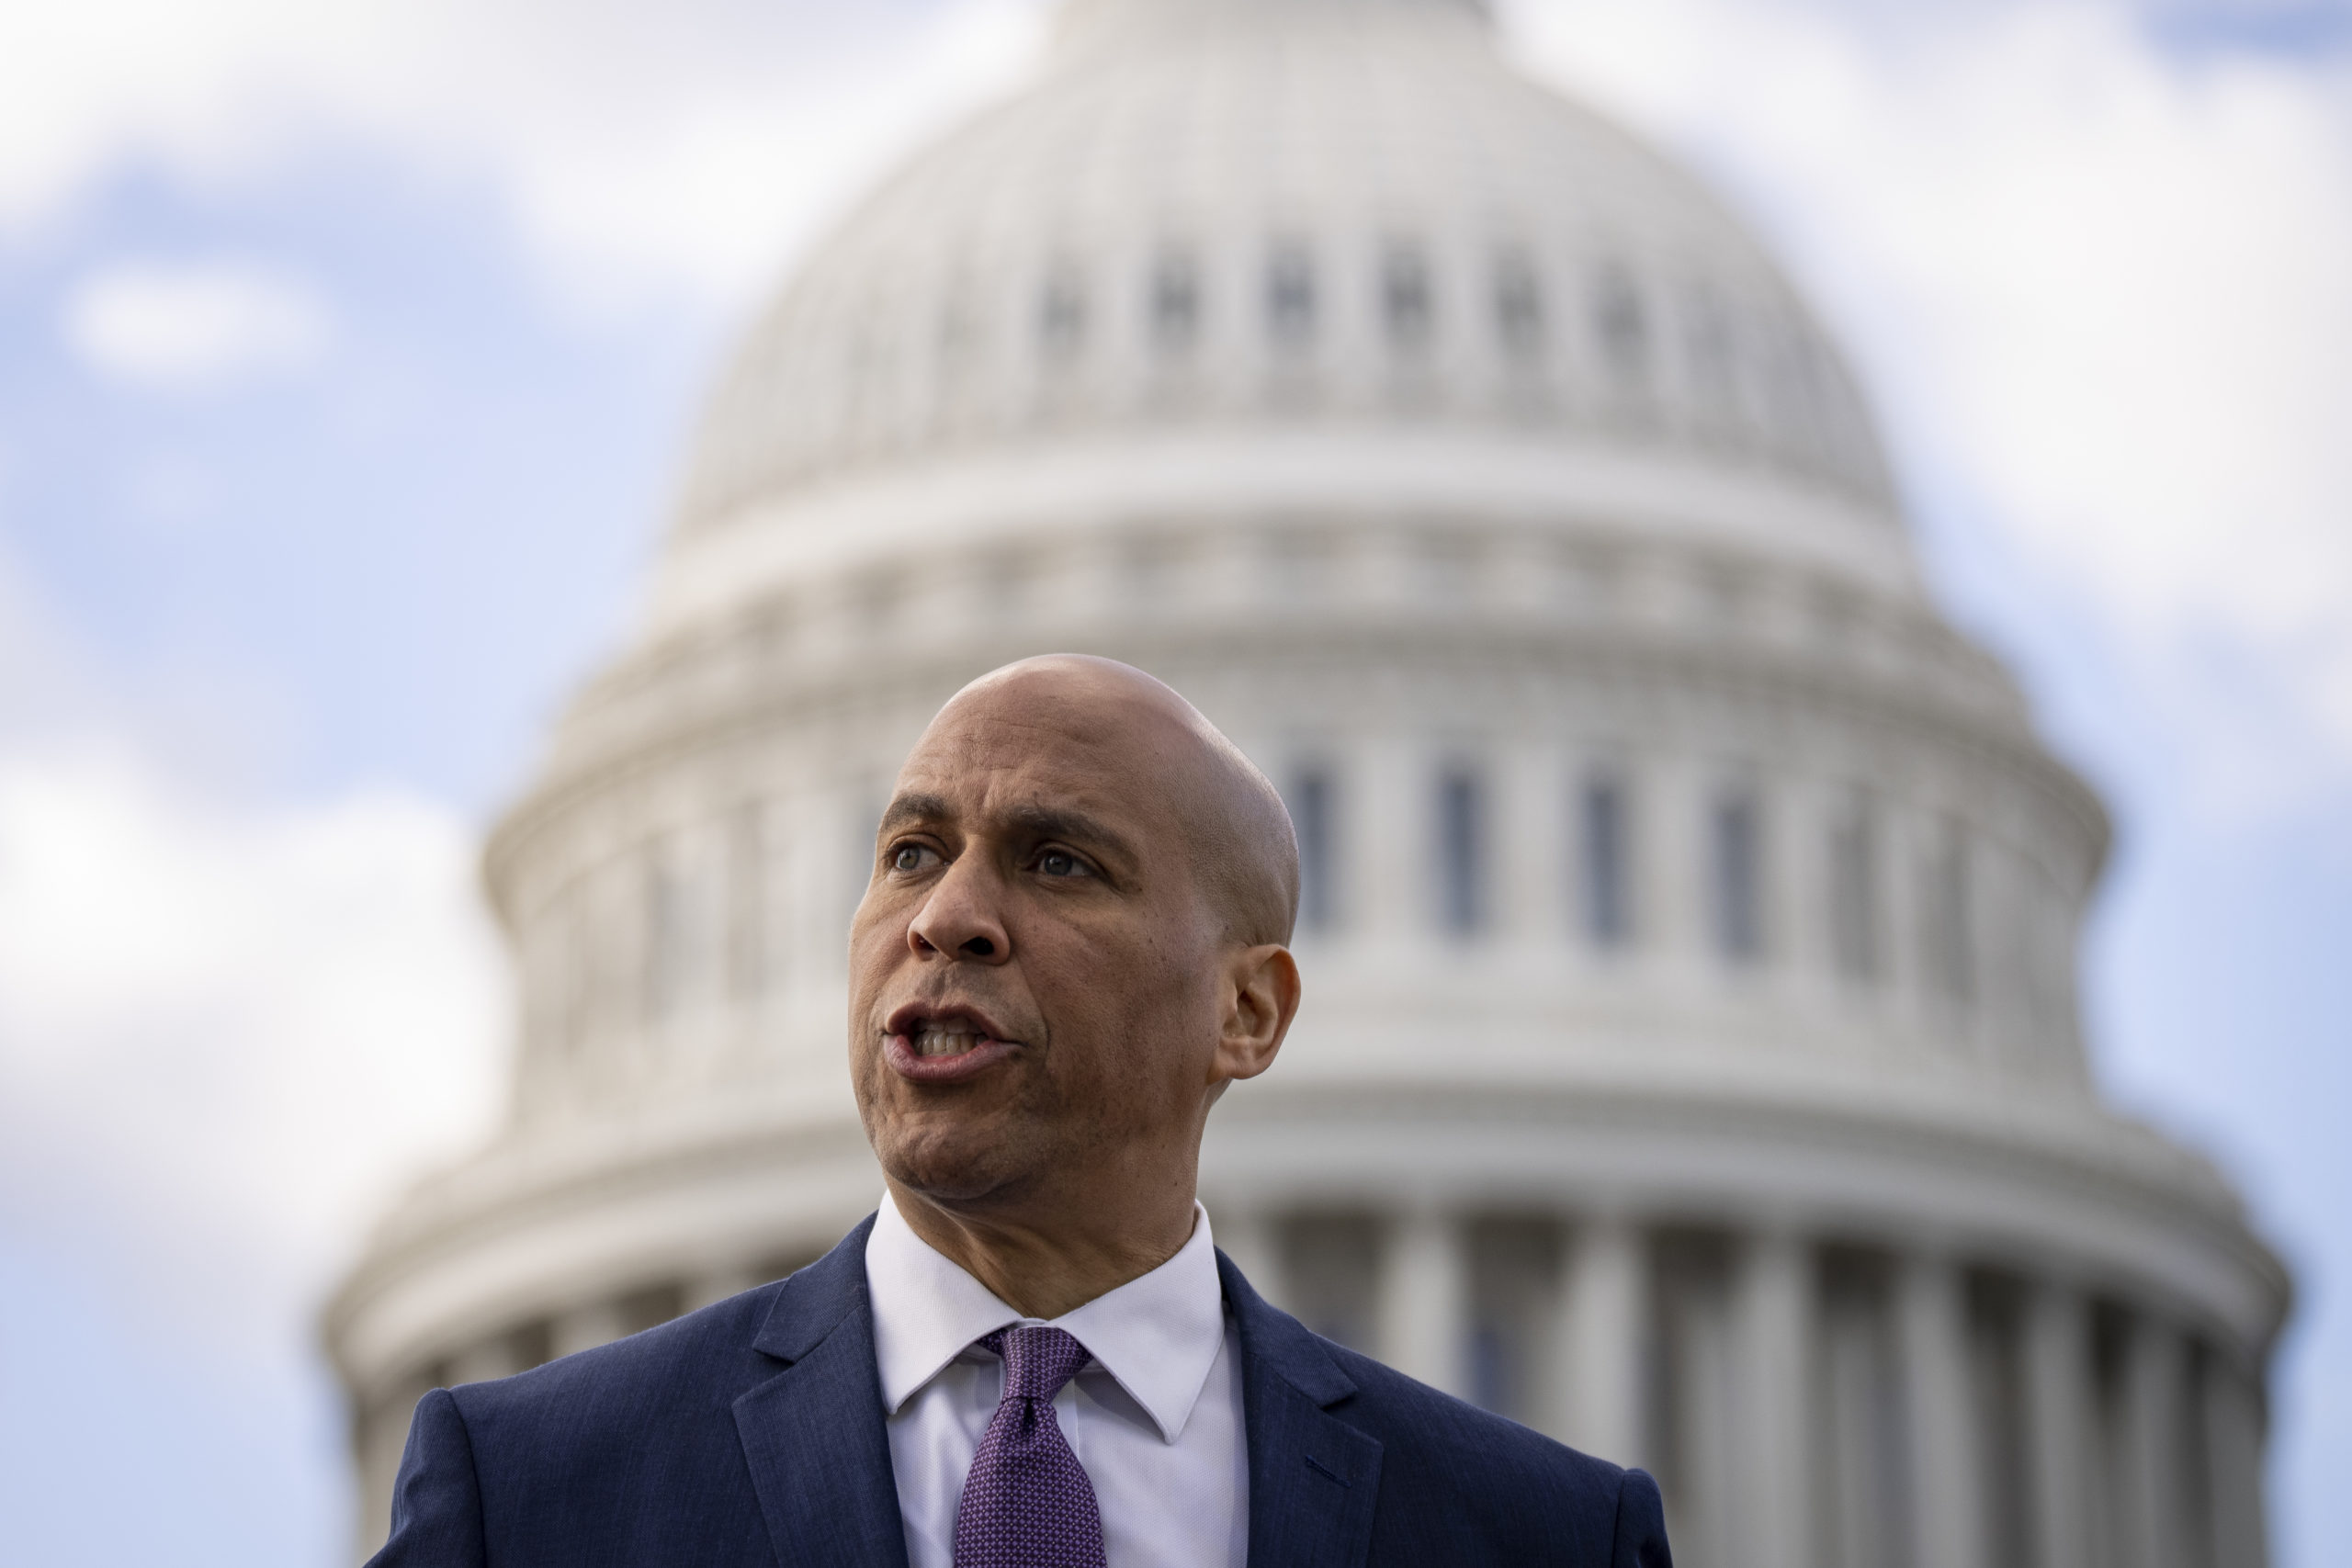 WASHINGTON, DC - JANUARY 26: Sen. Cory Booker (D-NJ) speaks during a news conference with Democratic lawmakers about the Biden administrations border politics, outside the U.S. Capitol on January 26, 2023 in Washington, DC. A group of 77 Democratic lawmakers sent a letter to President Joe Biden this week criticizing his administrations policies restricting asylum access for migrants crossing the southern border. (Photo by Drew Angerer/Getty Images)